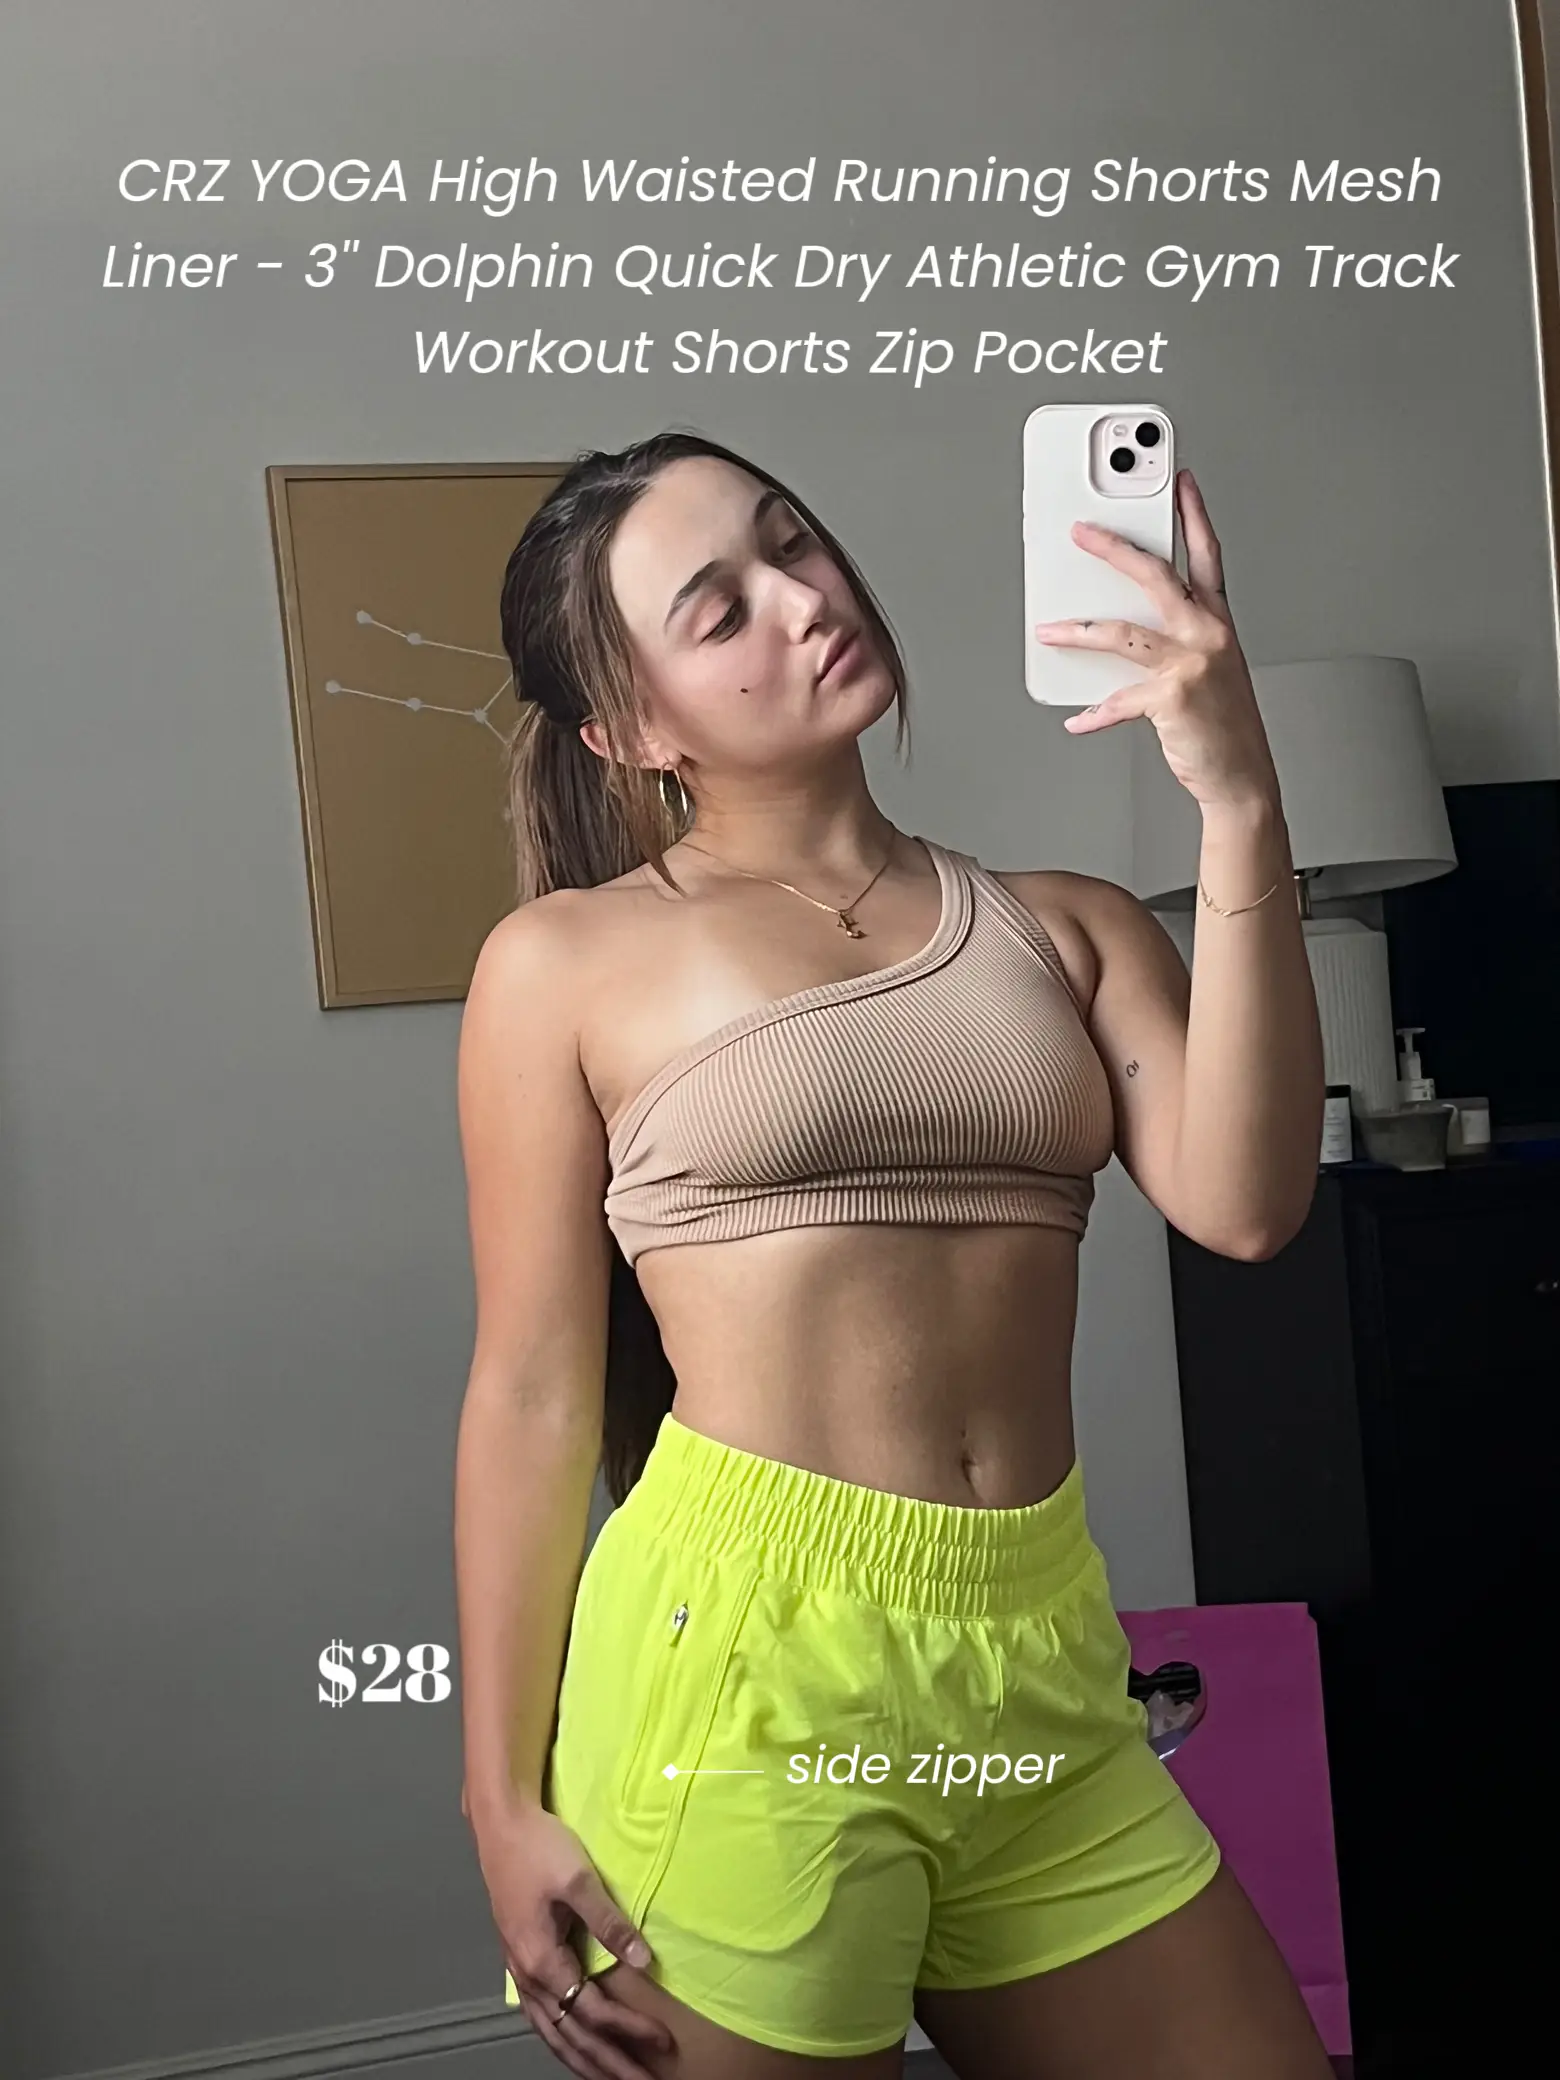 suggestions for spandex shorts - Lemon8 Search